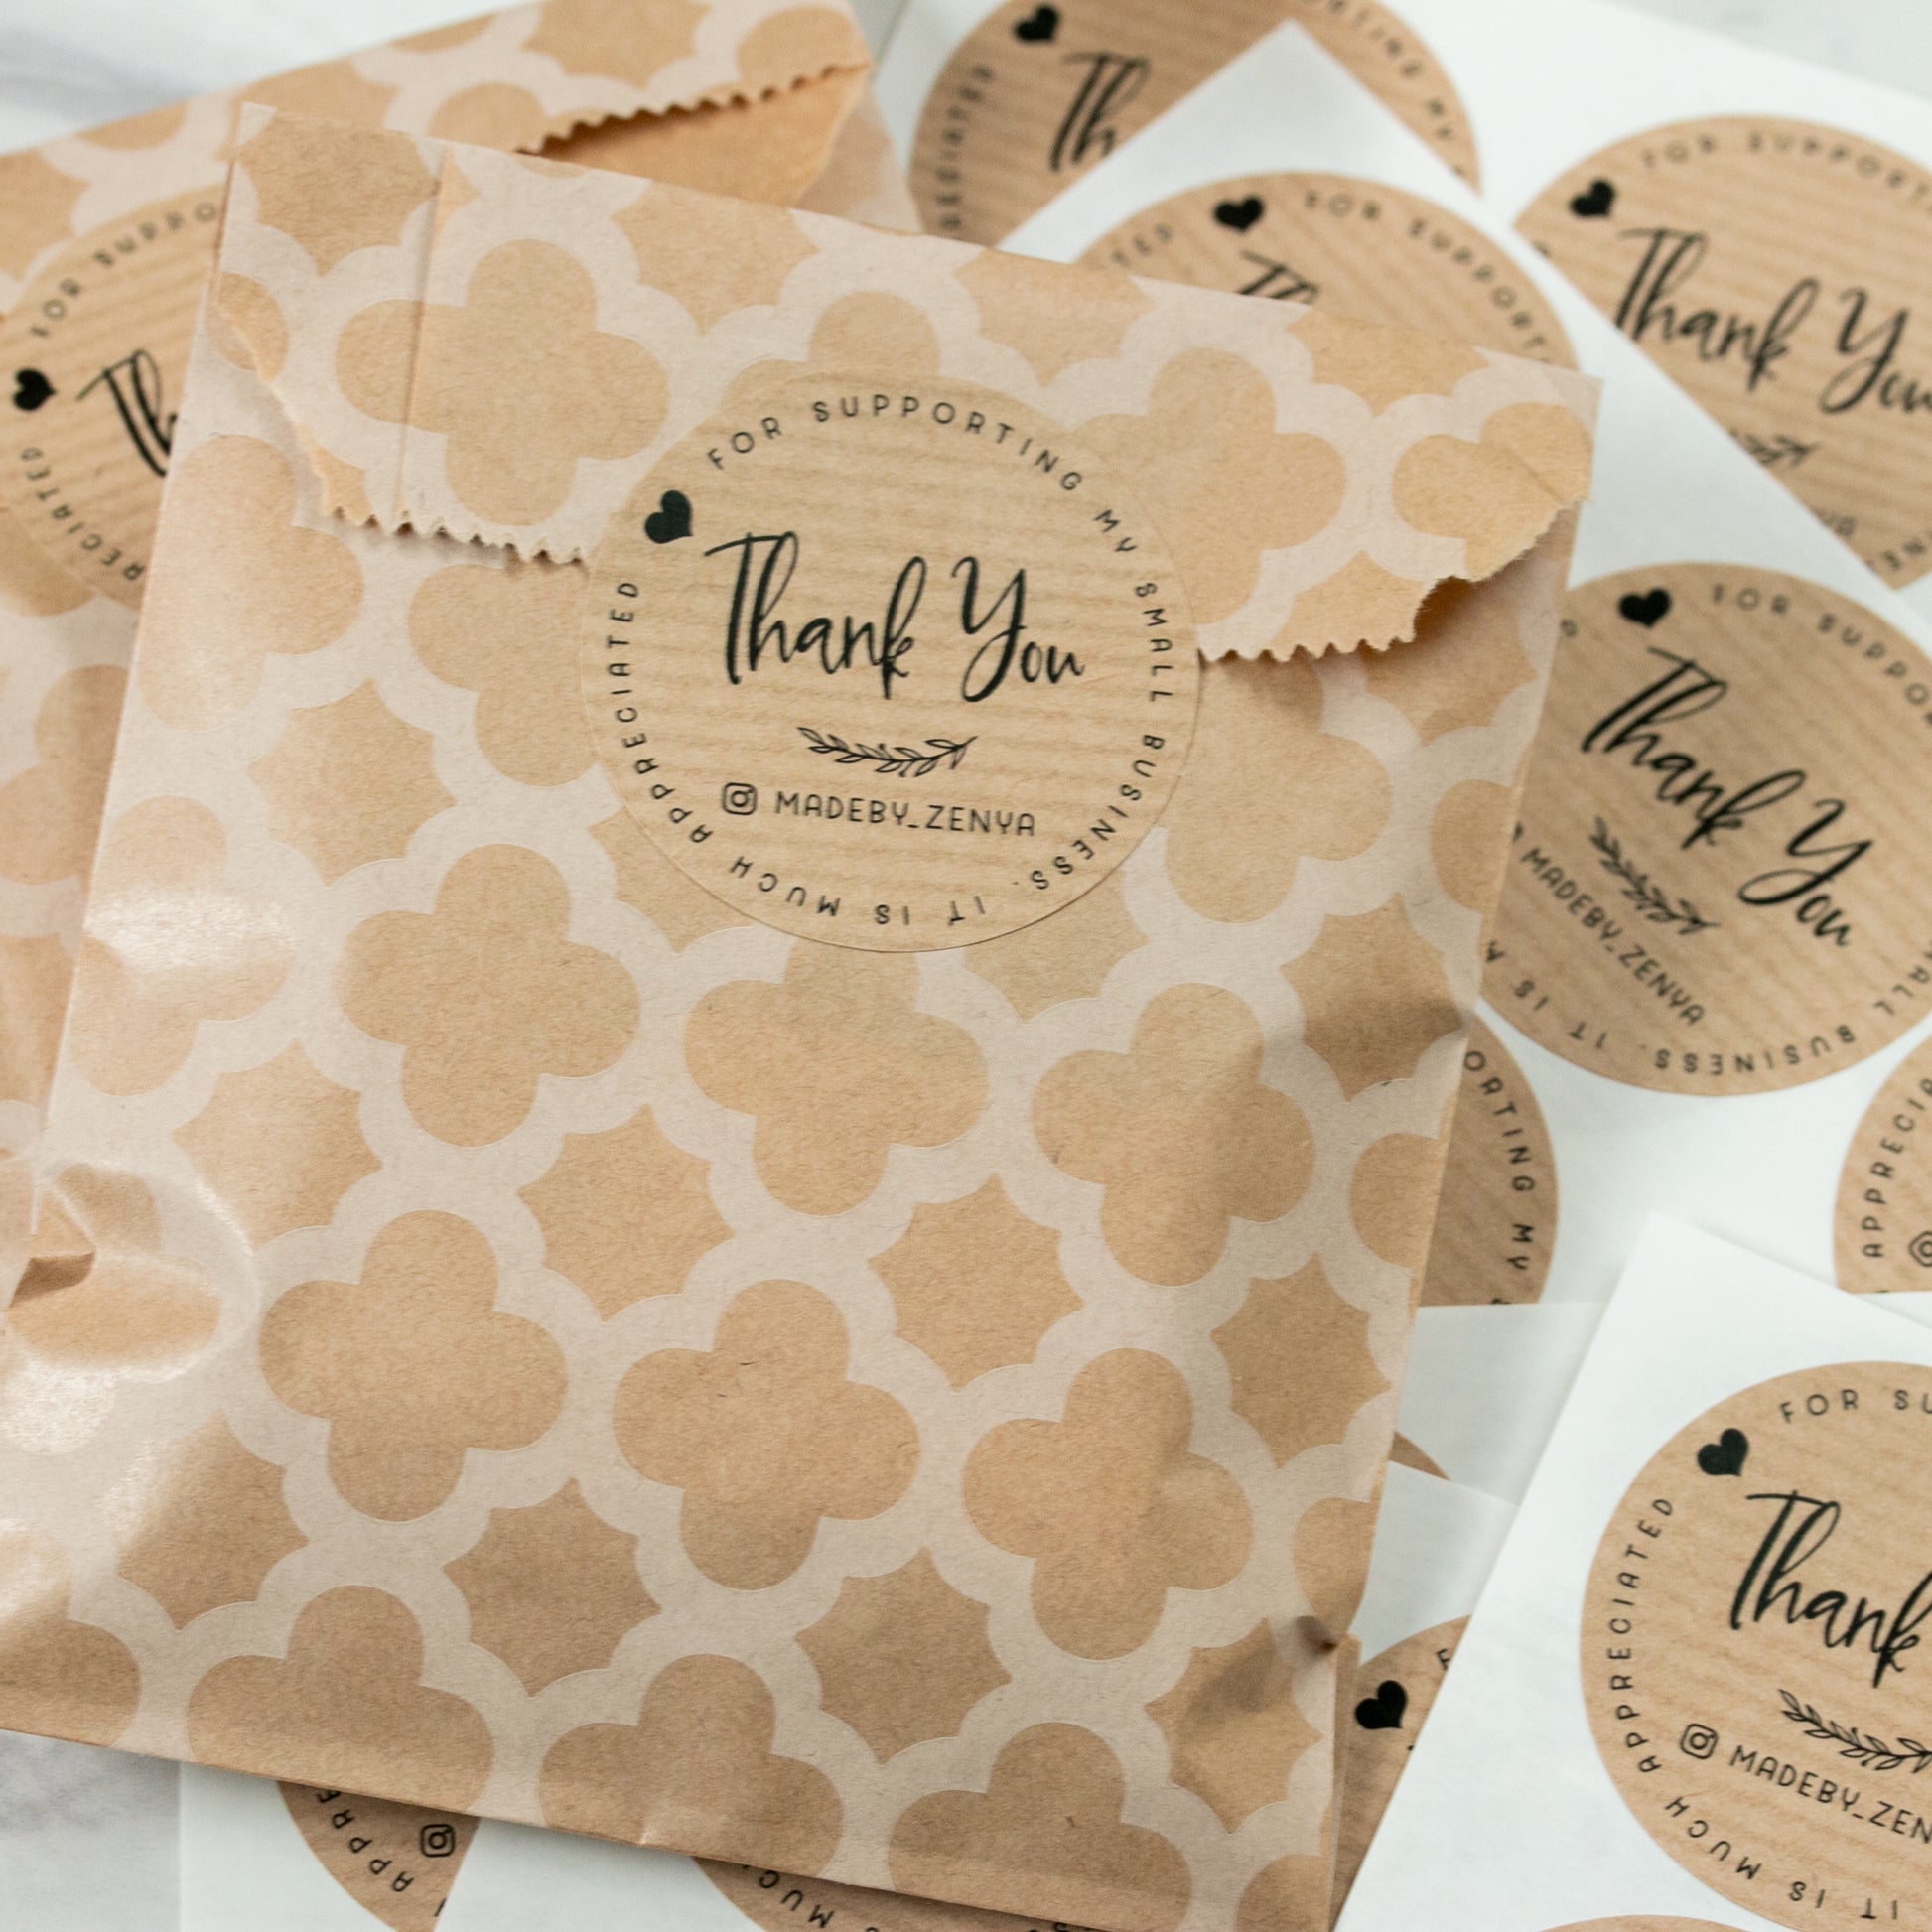 Thank you for supporting my small business stickers- XOXOKristen 